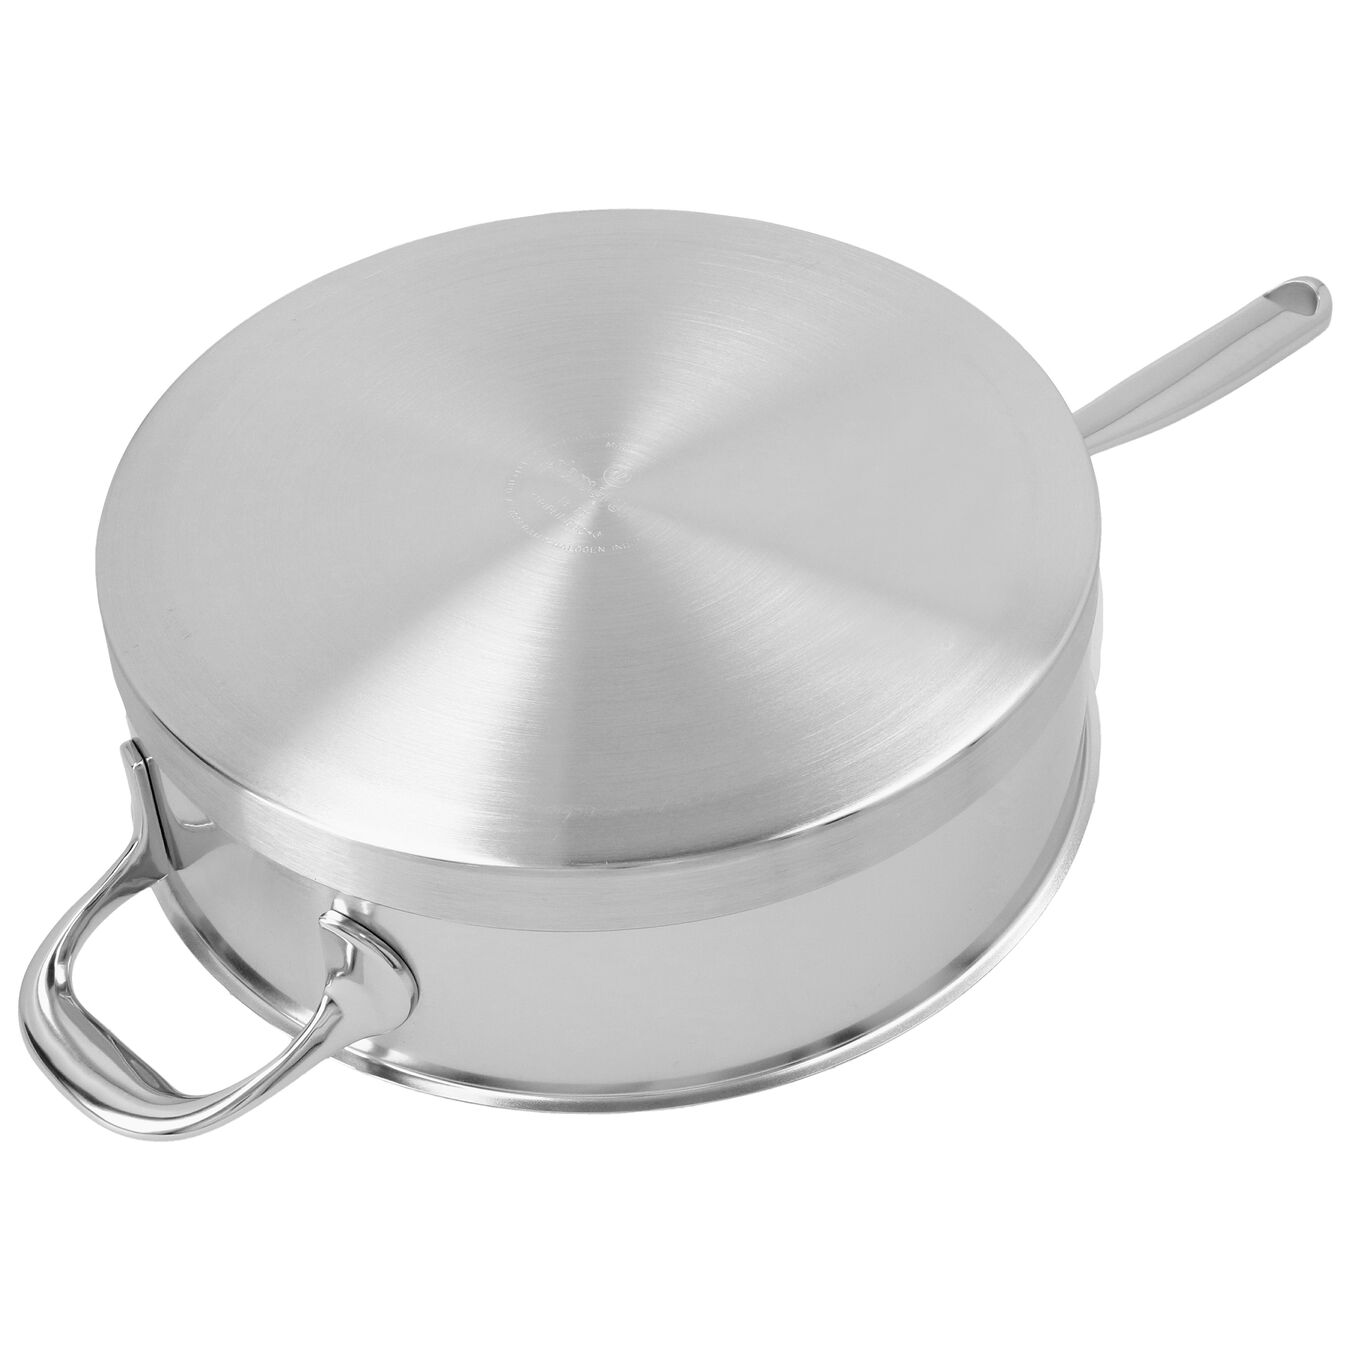 11-inch Sauté Pan with Helper Handle and Lid, 18/10 Stainless Steel ,,large 6